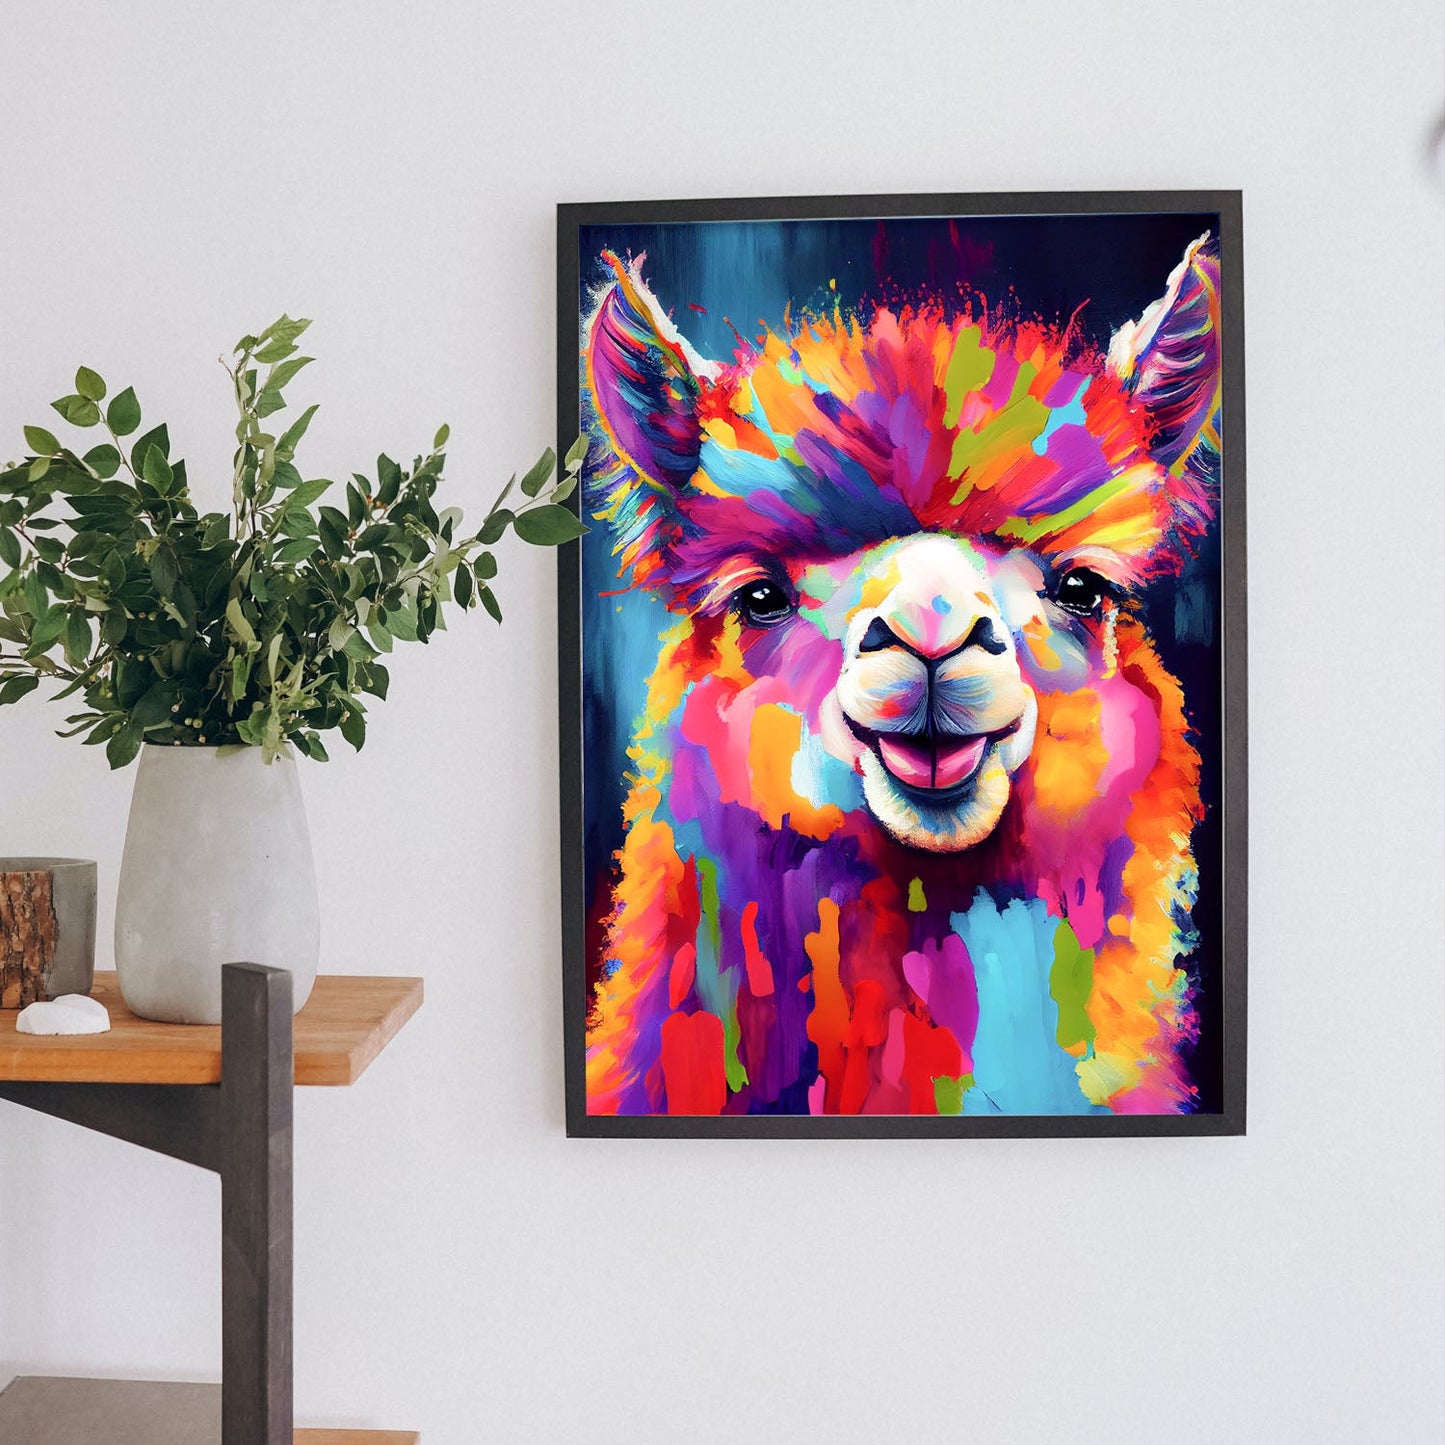 Nacnic Abstract smiling Alpaca in Lisa Fran Style_2. Aesthetic Wall Art Prints for Bedroom or Living Room Design.